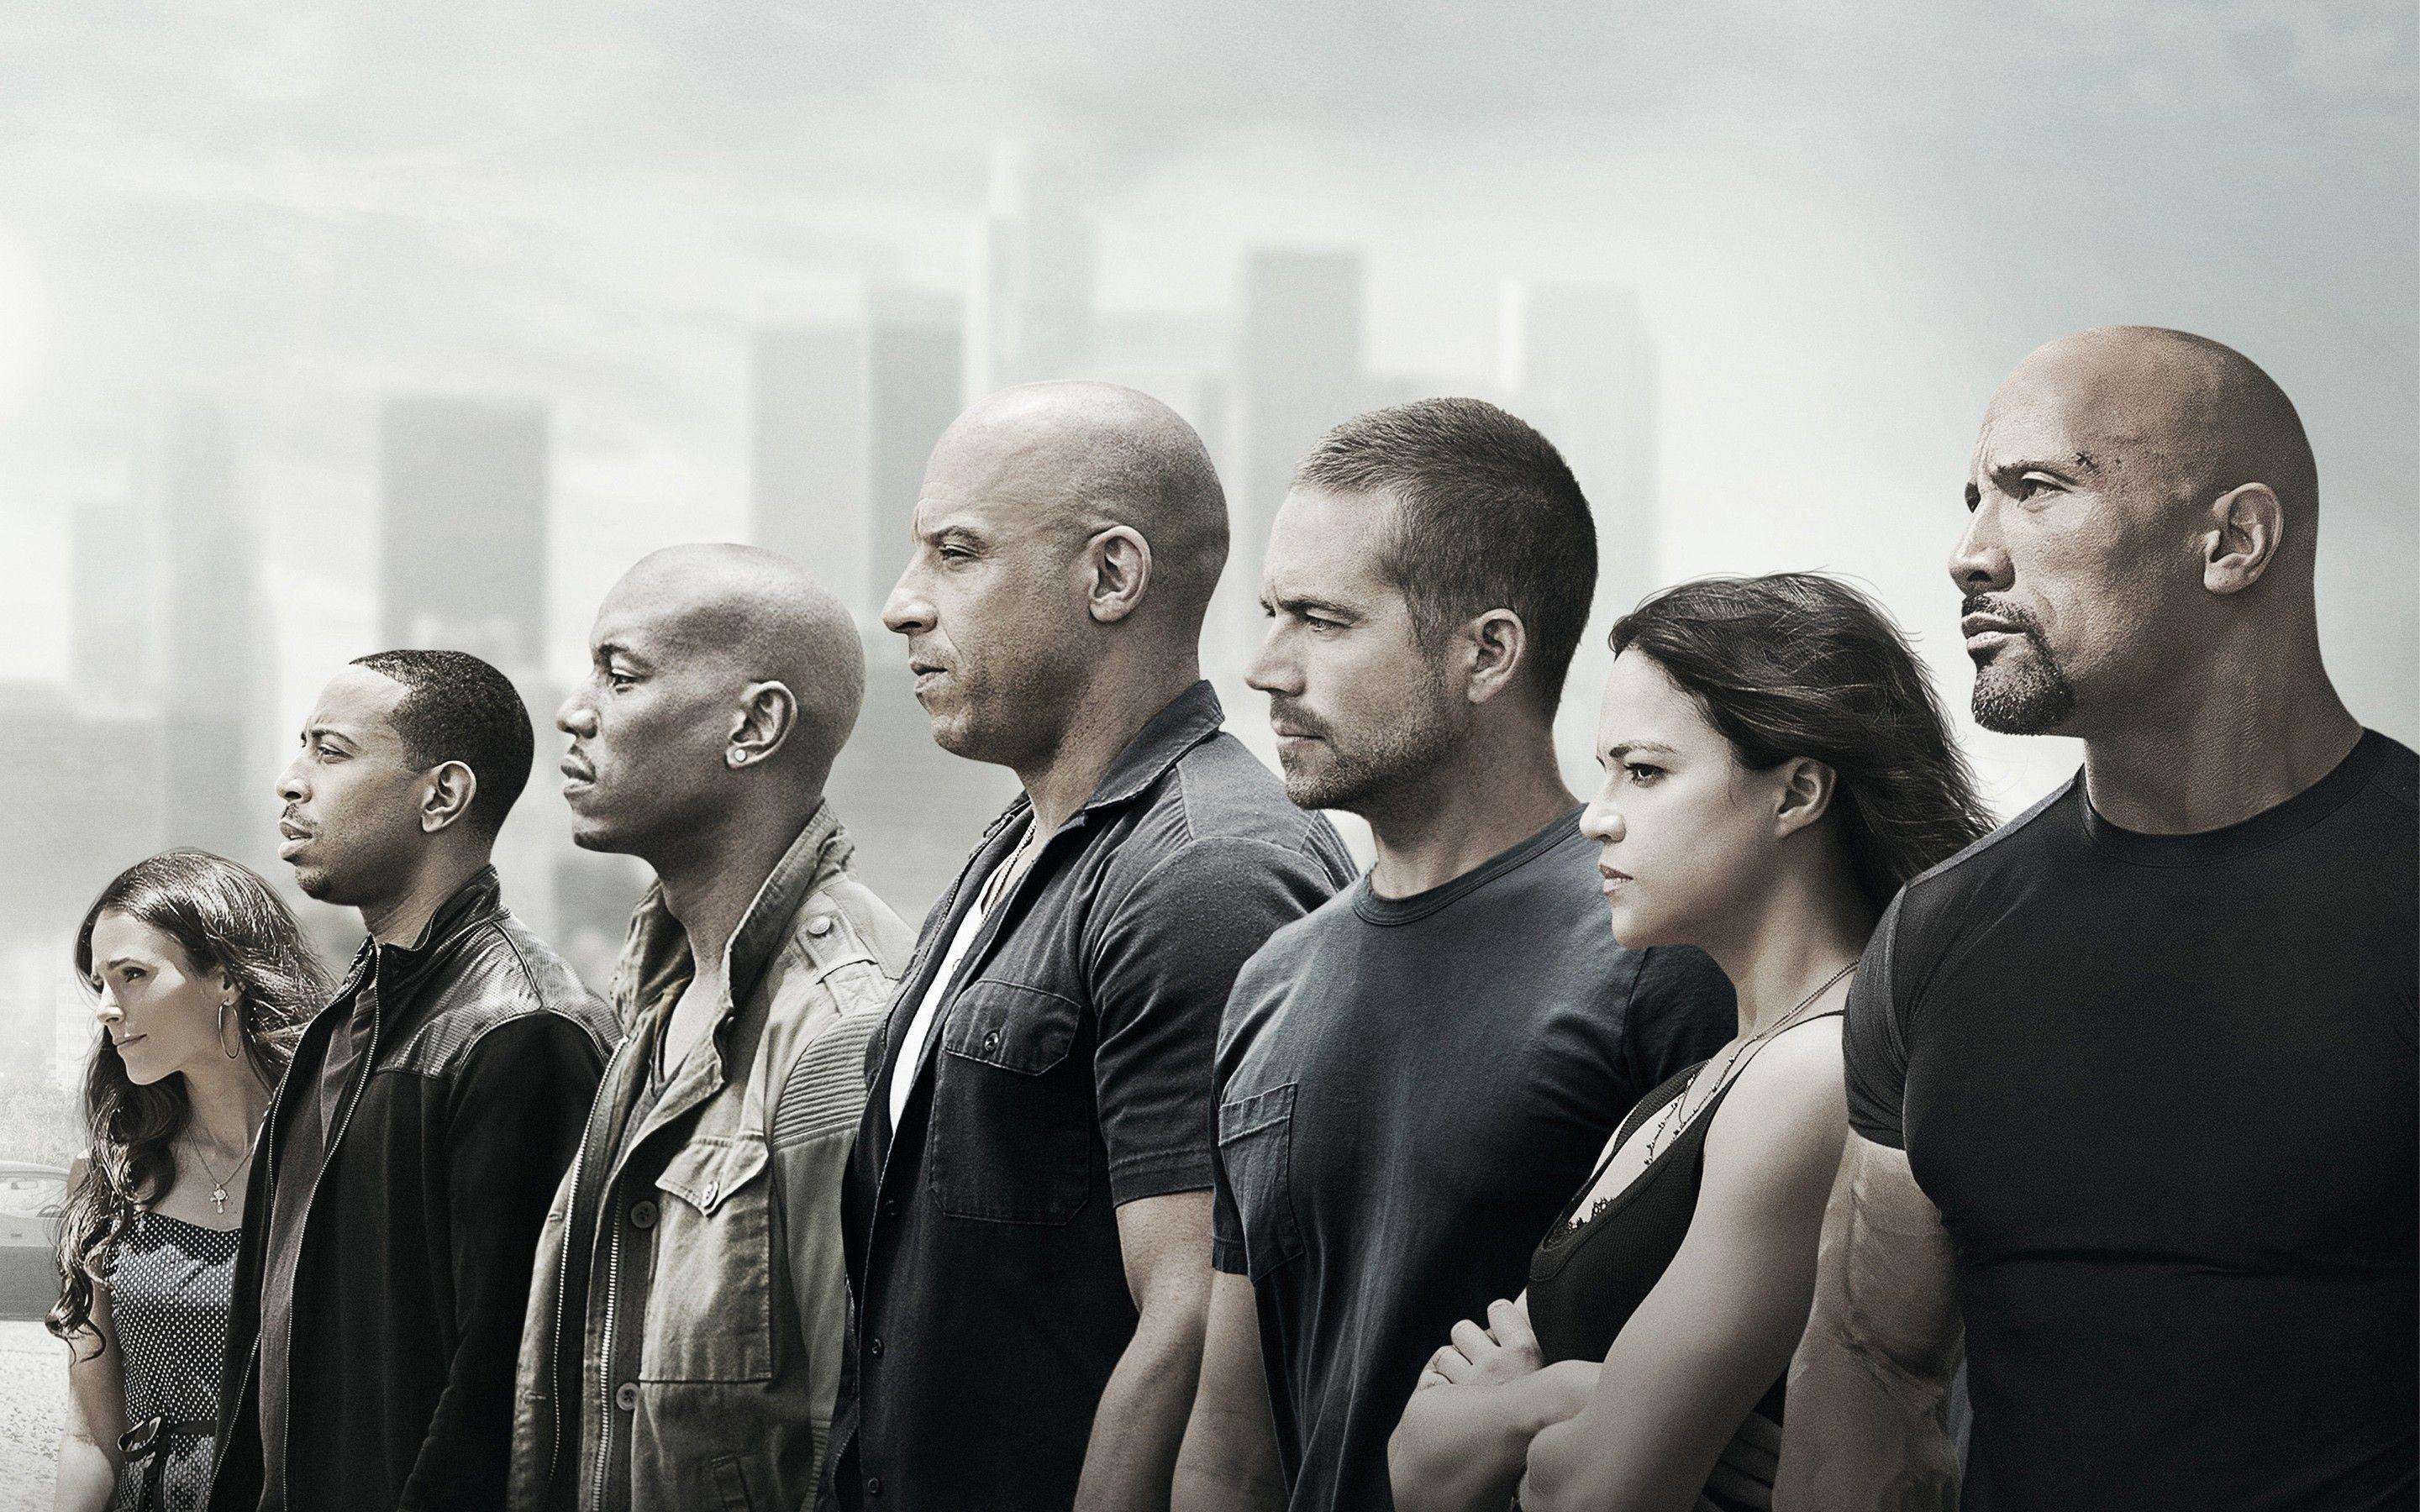 Download Fast And Furious 7 2015 HD 4k Wallpaper In 2048x1152